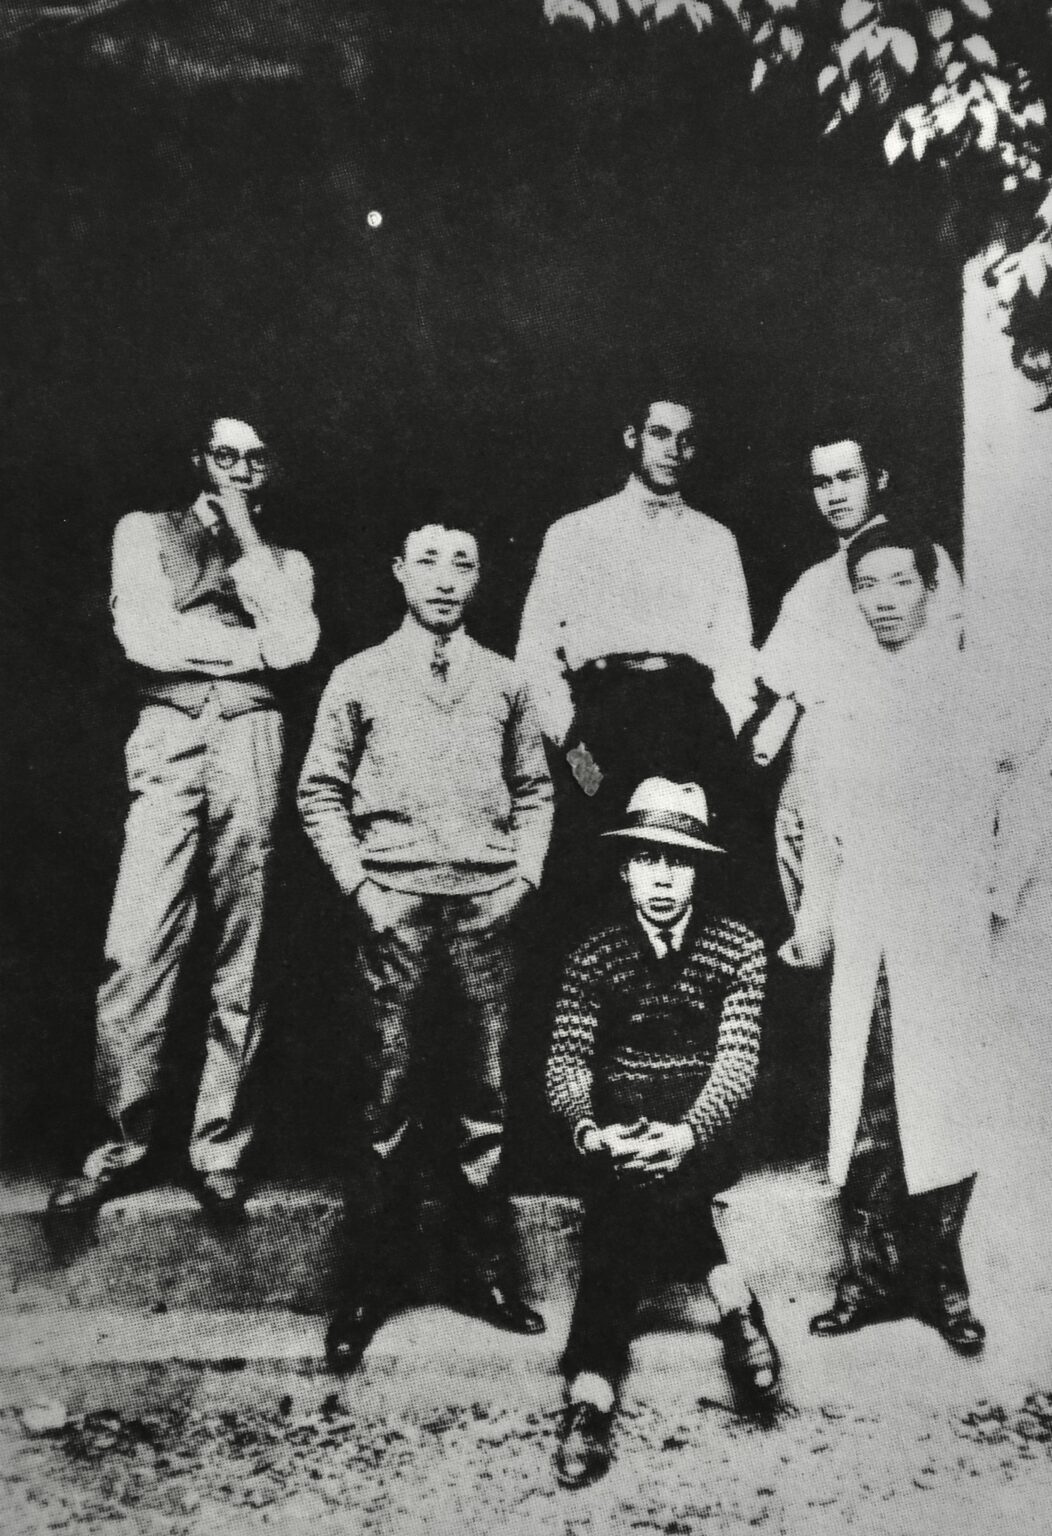 Some first students of the École des Beaux-Arts de l'Indochine (The Fine Arts College of Indochina).
From left to right: Le Pho, Tran Quang Tran, Georges Khanh,
Le Van De, To Ngoc Van and Mai Trung Thu (seated)